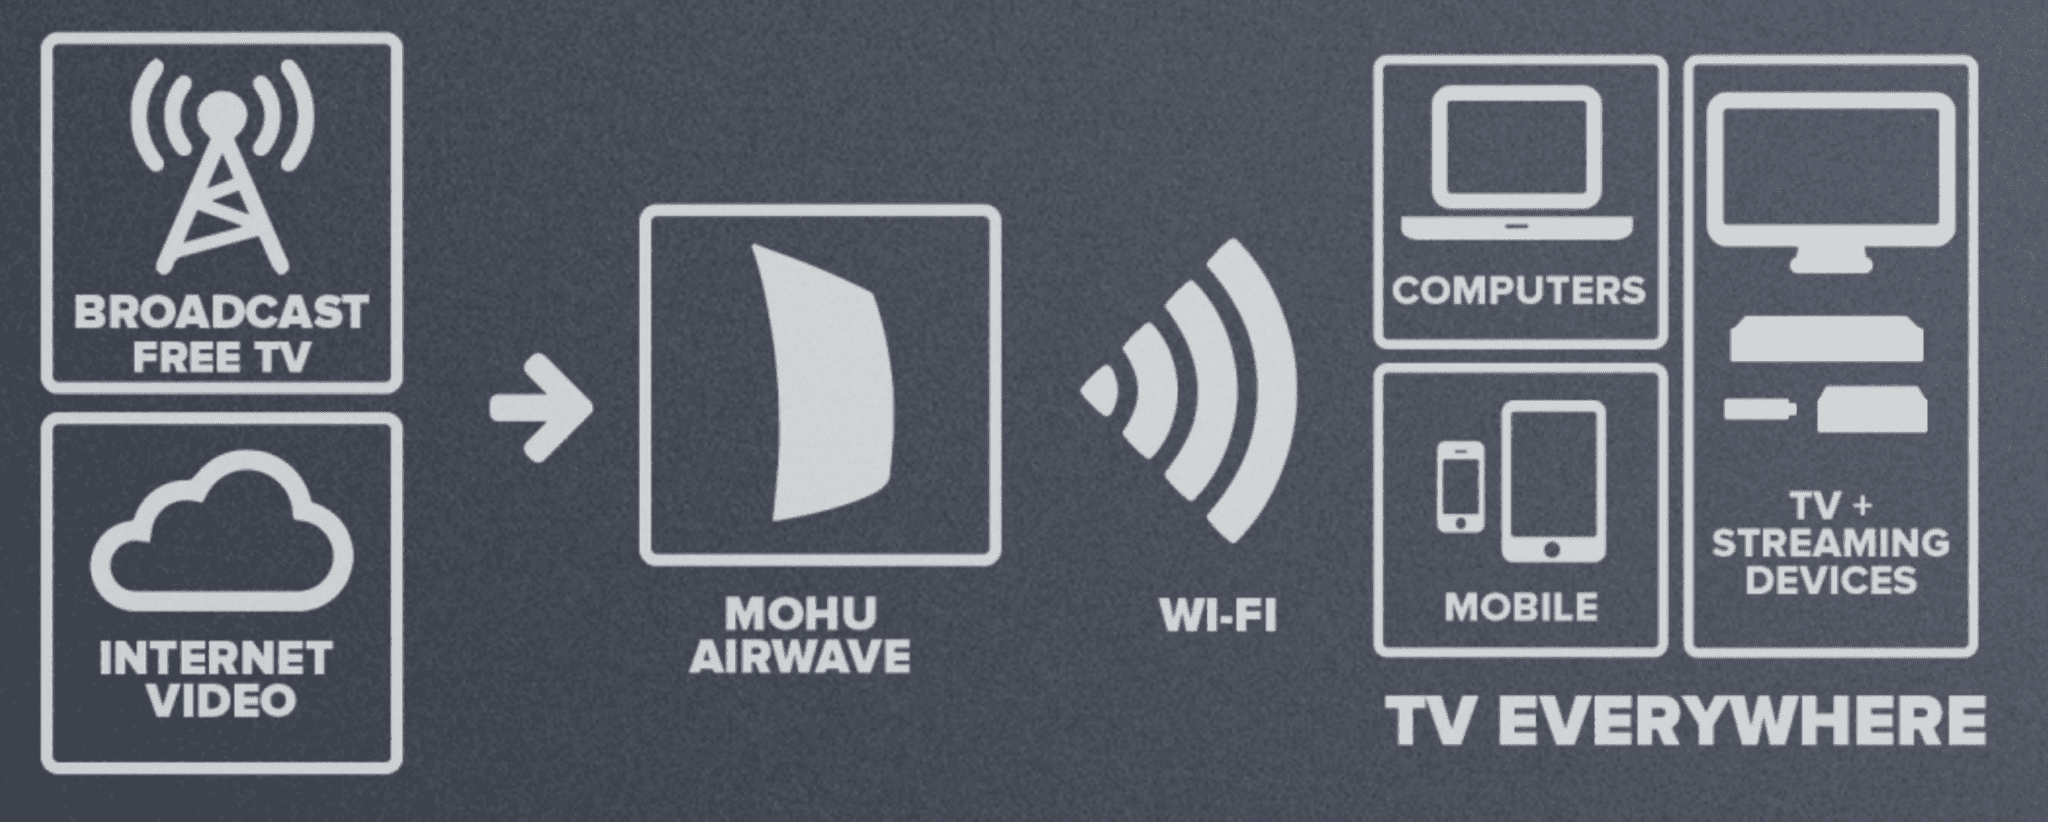 Mohu AirWave Review Lots of Advantages for Cord-Cutters, but Are There Drawbacks?